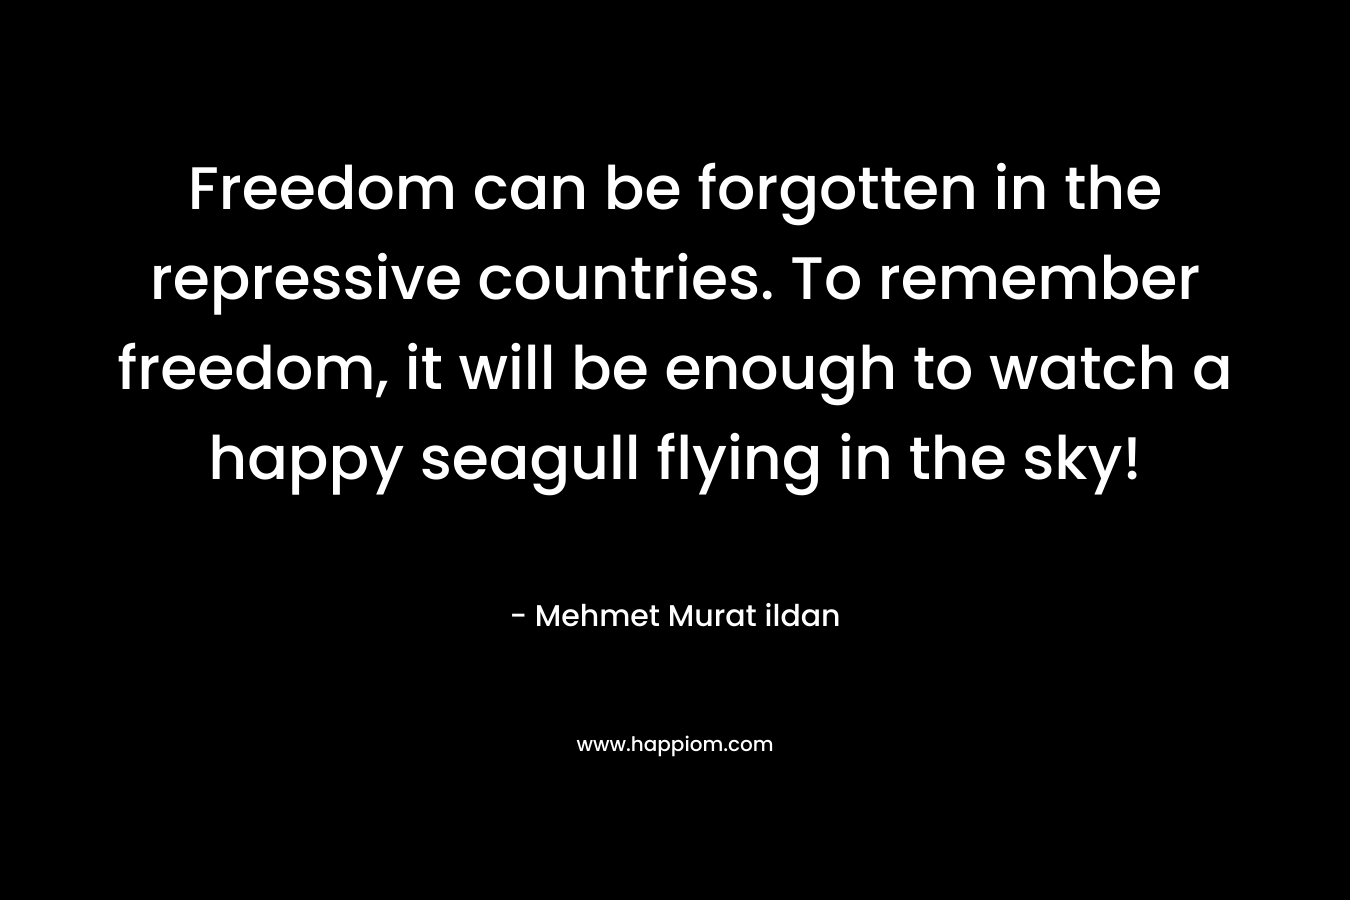 Freedom can be forgotten in the repressive countries. To remember freedom, it will be enough to watch a happy seagull flying in the sky! – Mehmet Murat ildan